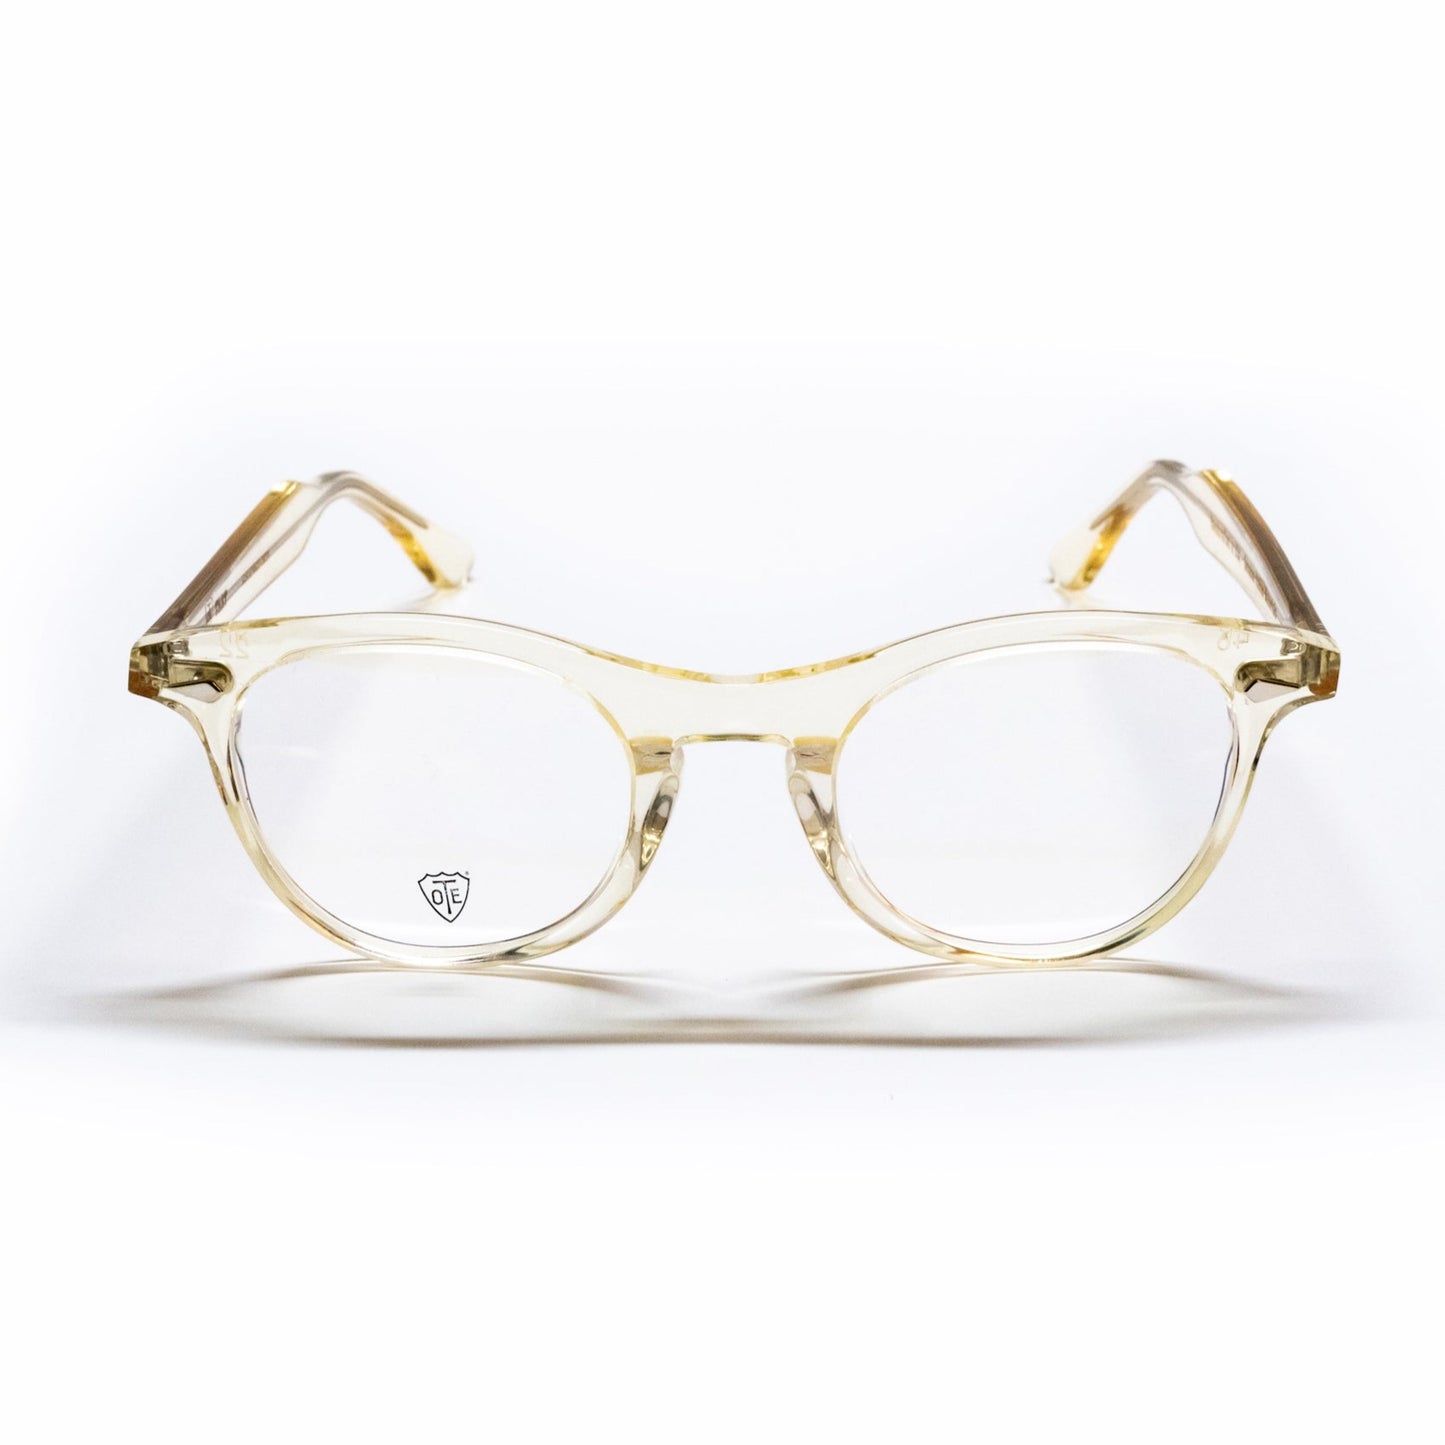 A front view of the champaign Leading Liz frame, the luxury cat-eye fashion glasses.